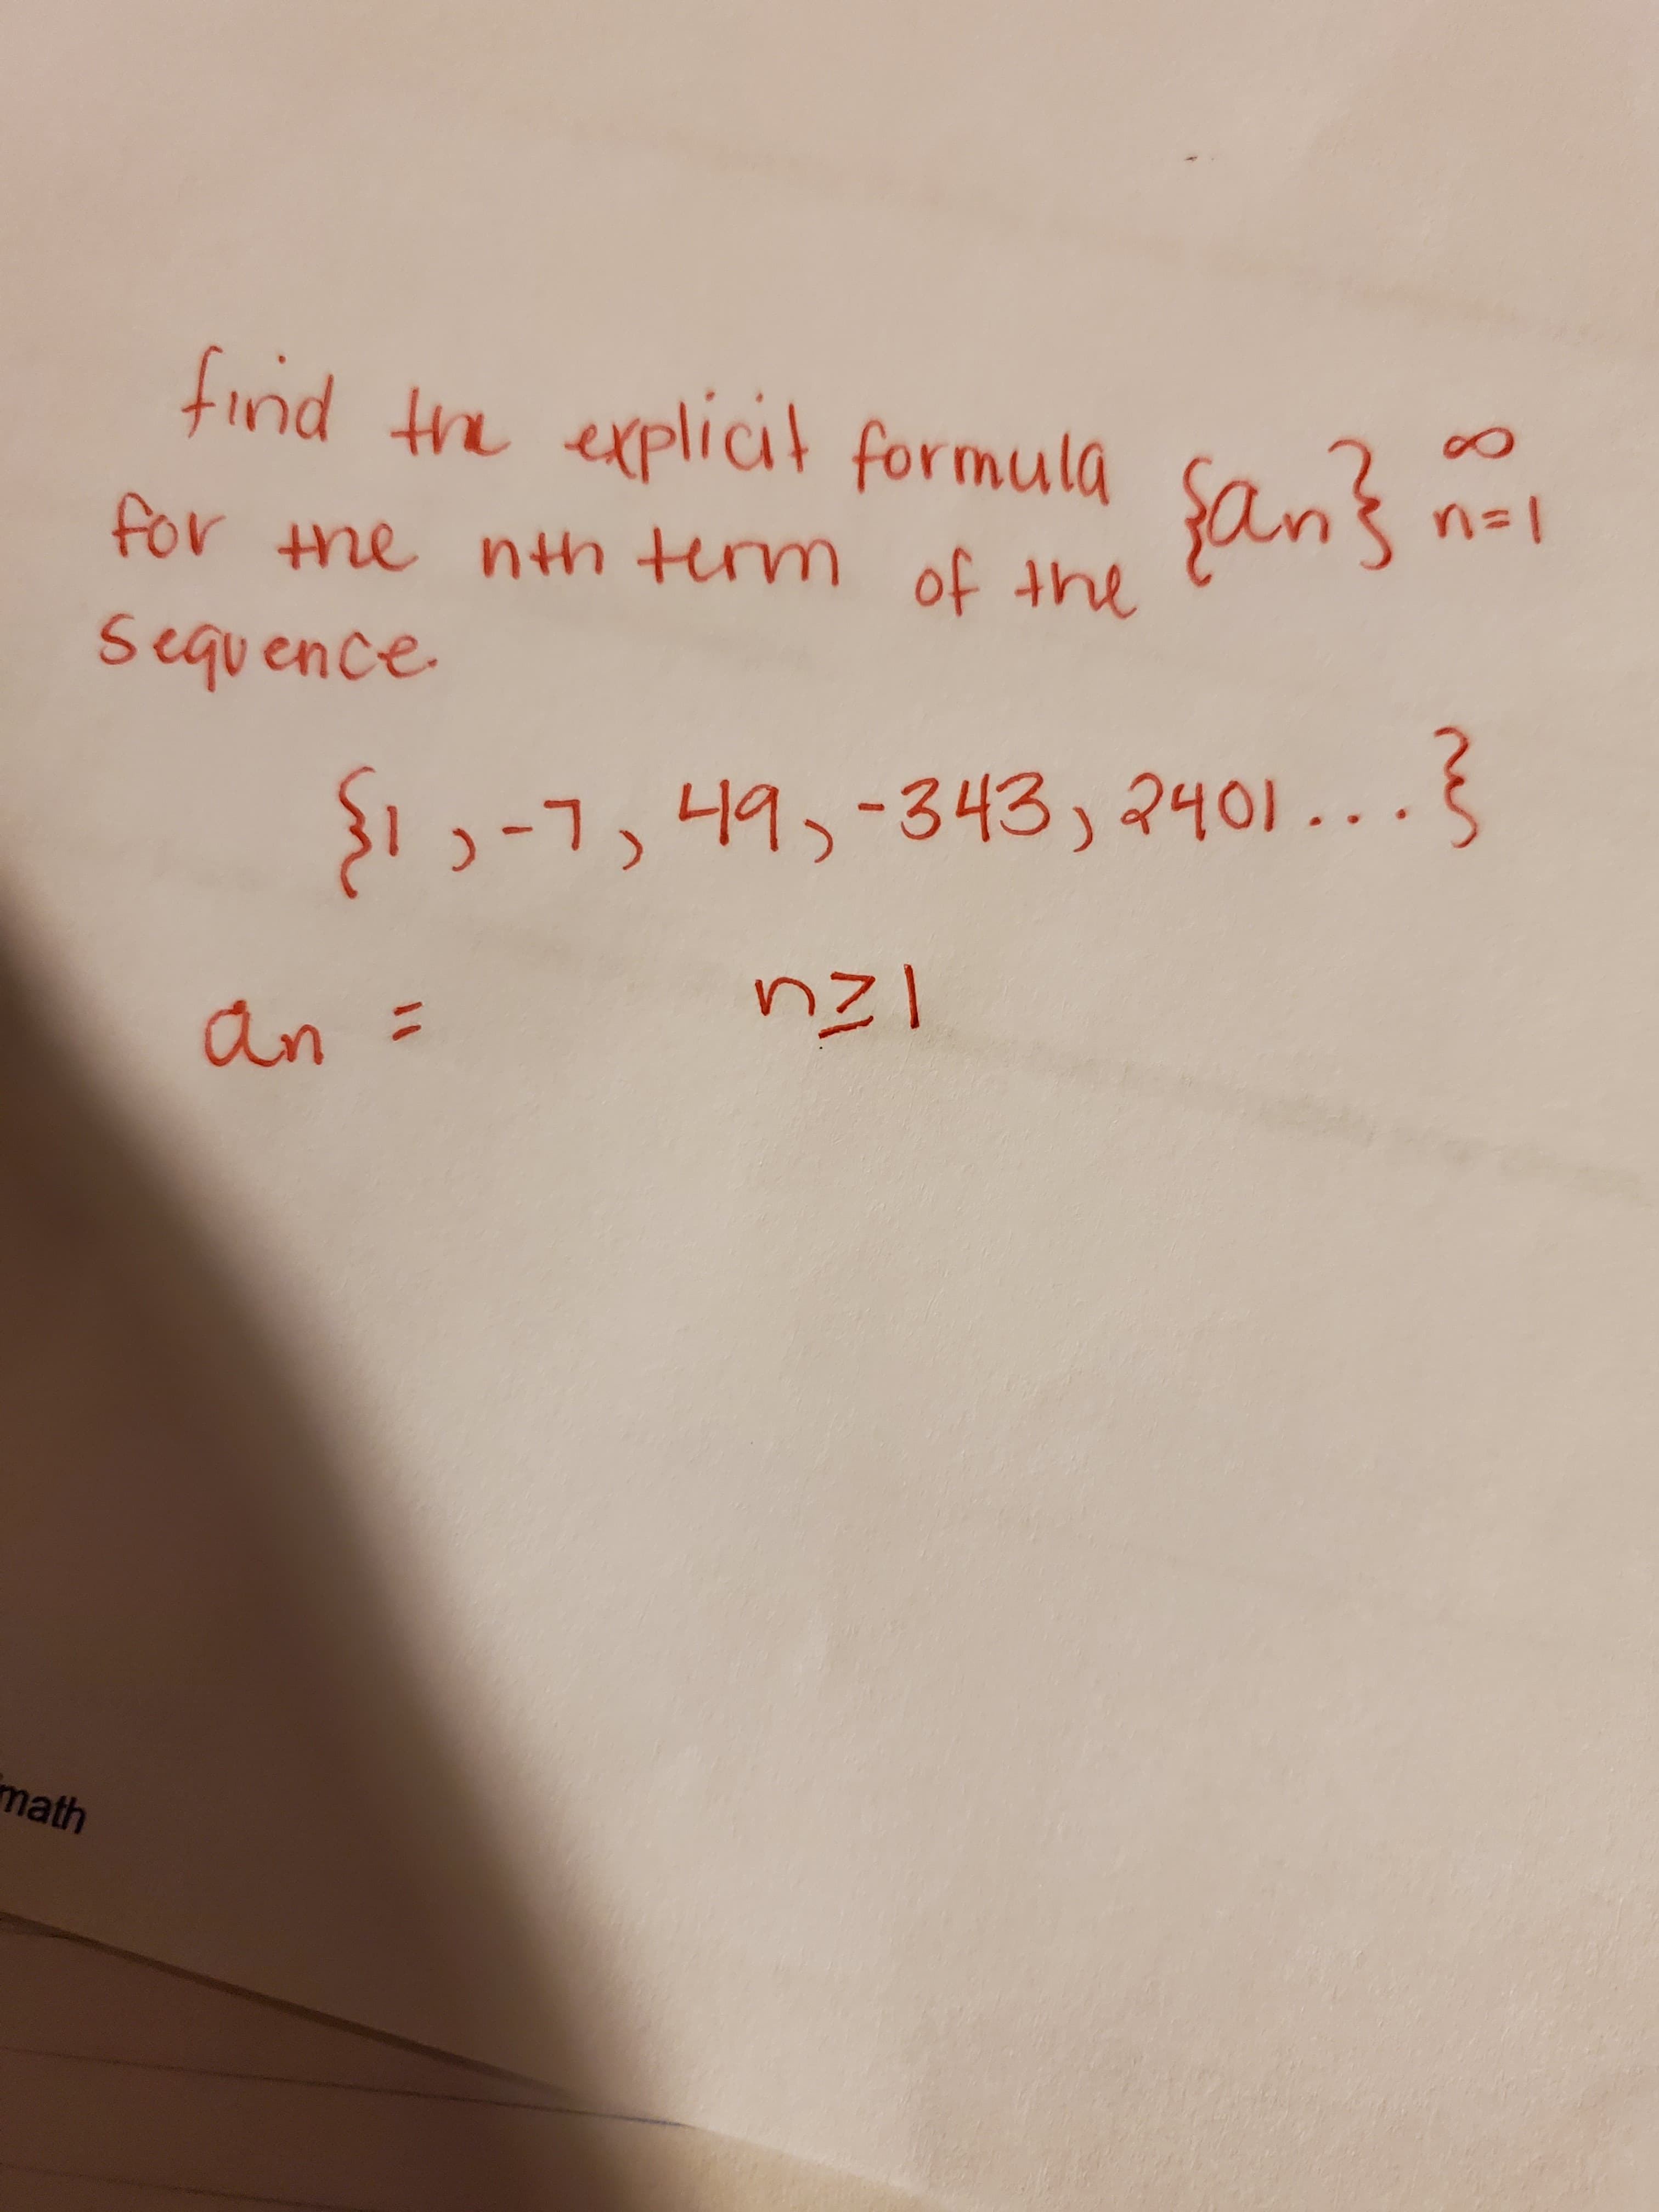 find the explicit formula
San's n-i
for the nth term of the
Sequence
343,2401..
>1)-7, 니9,- . 6
an =
math
